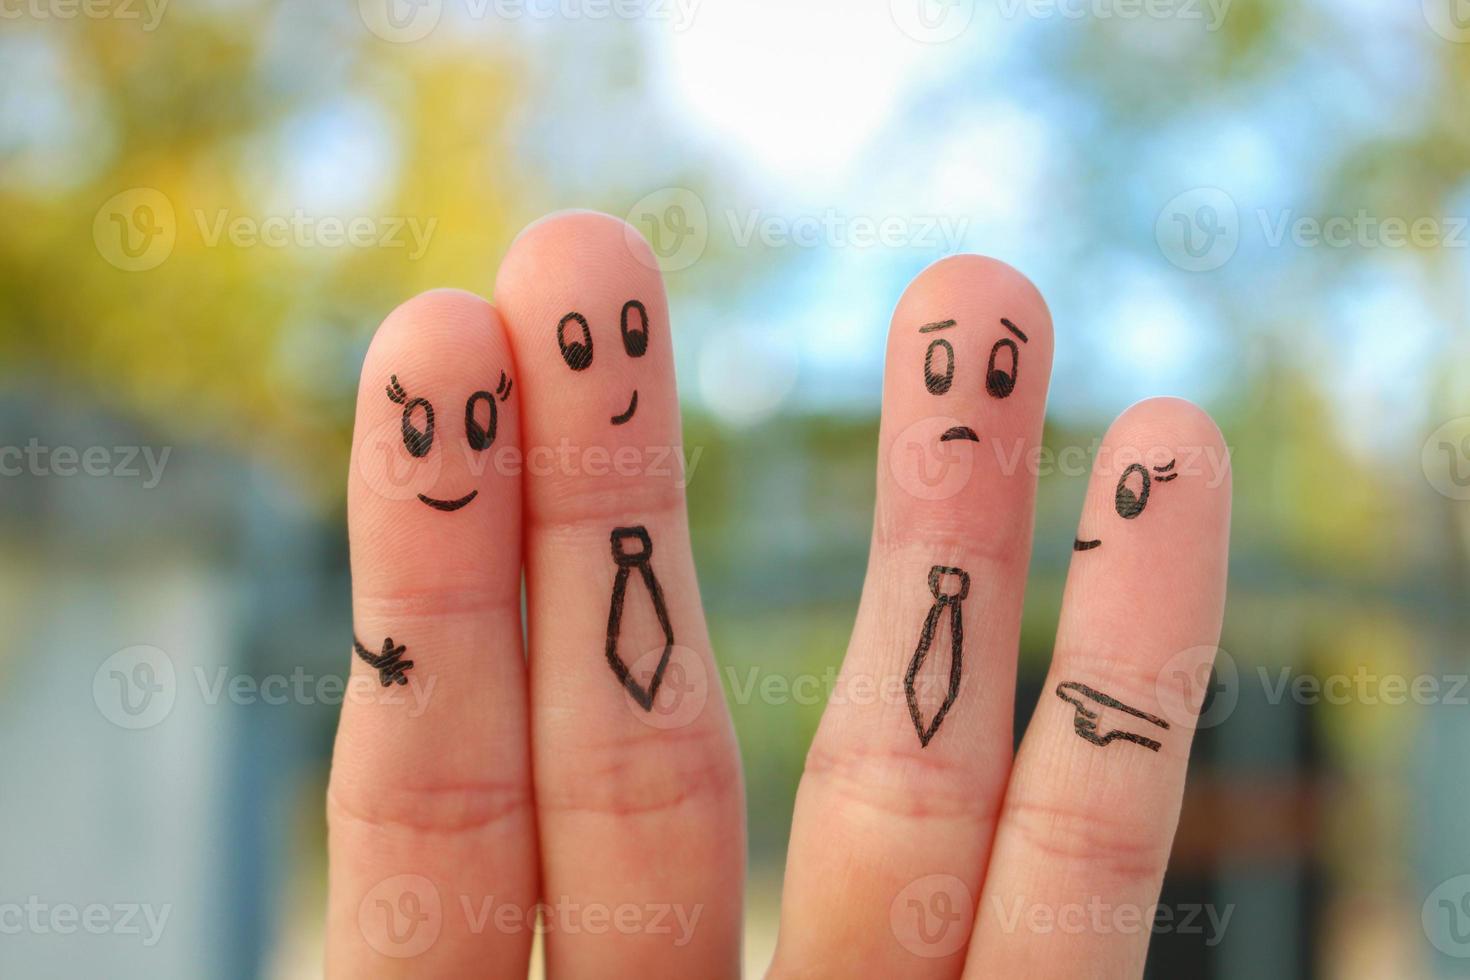 Fingers art of happy couple. Concept of office romance. People around laugh at them. photo